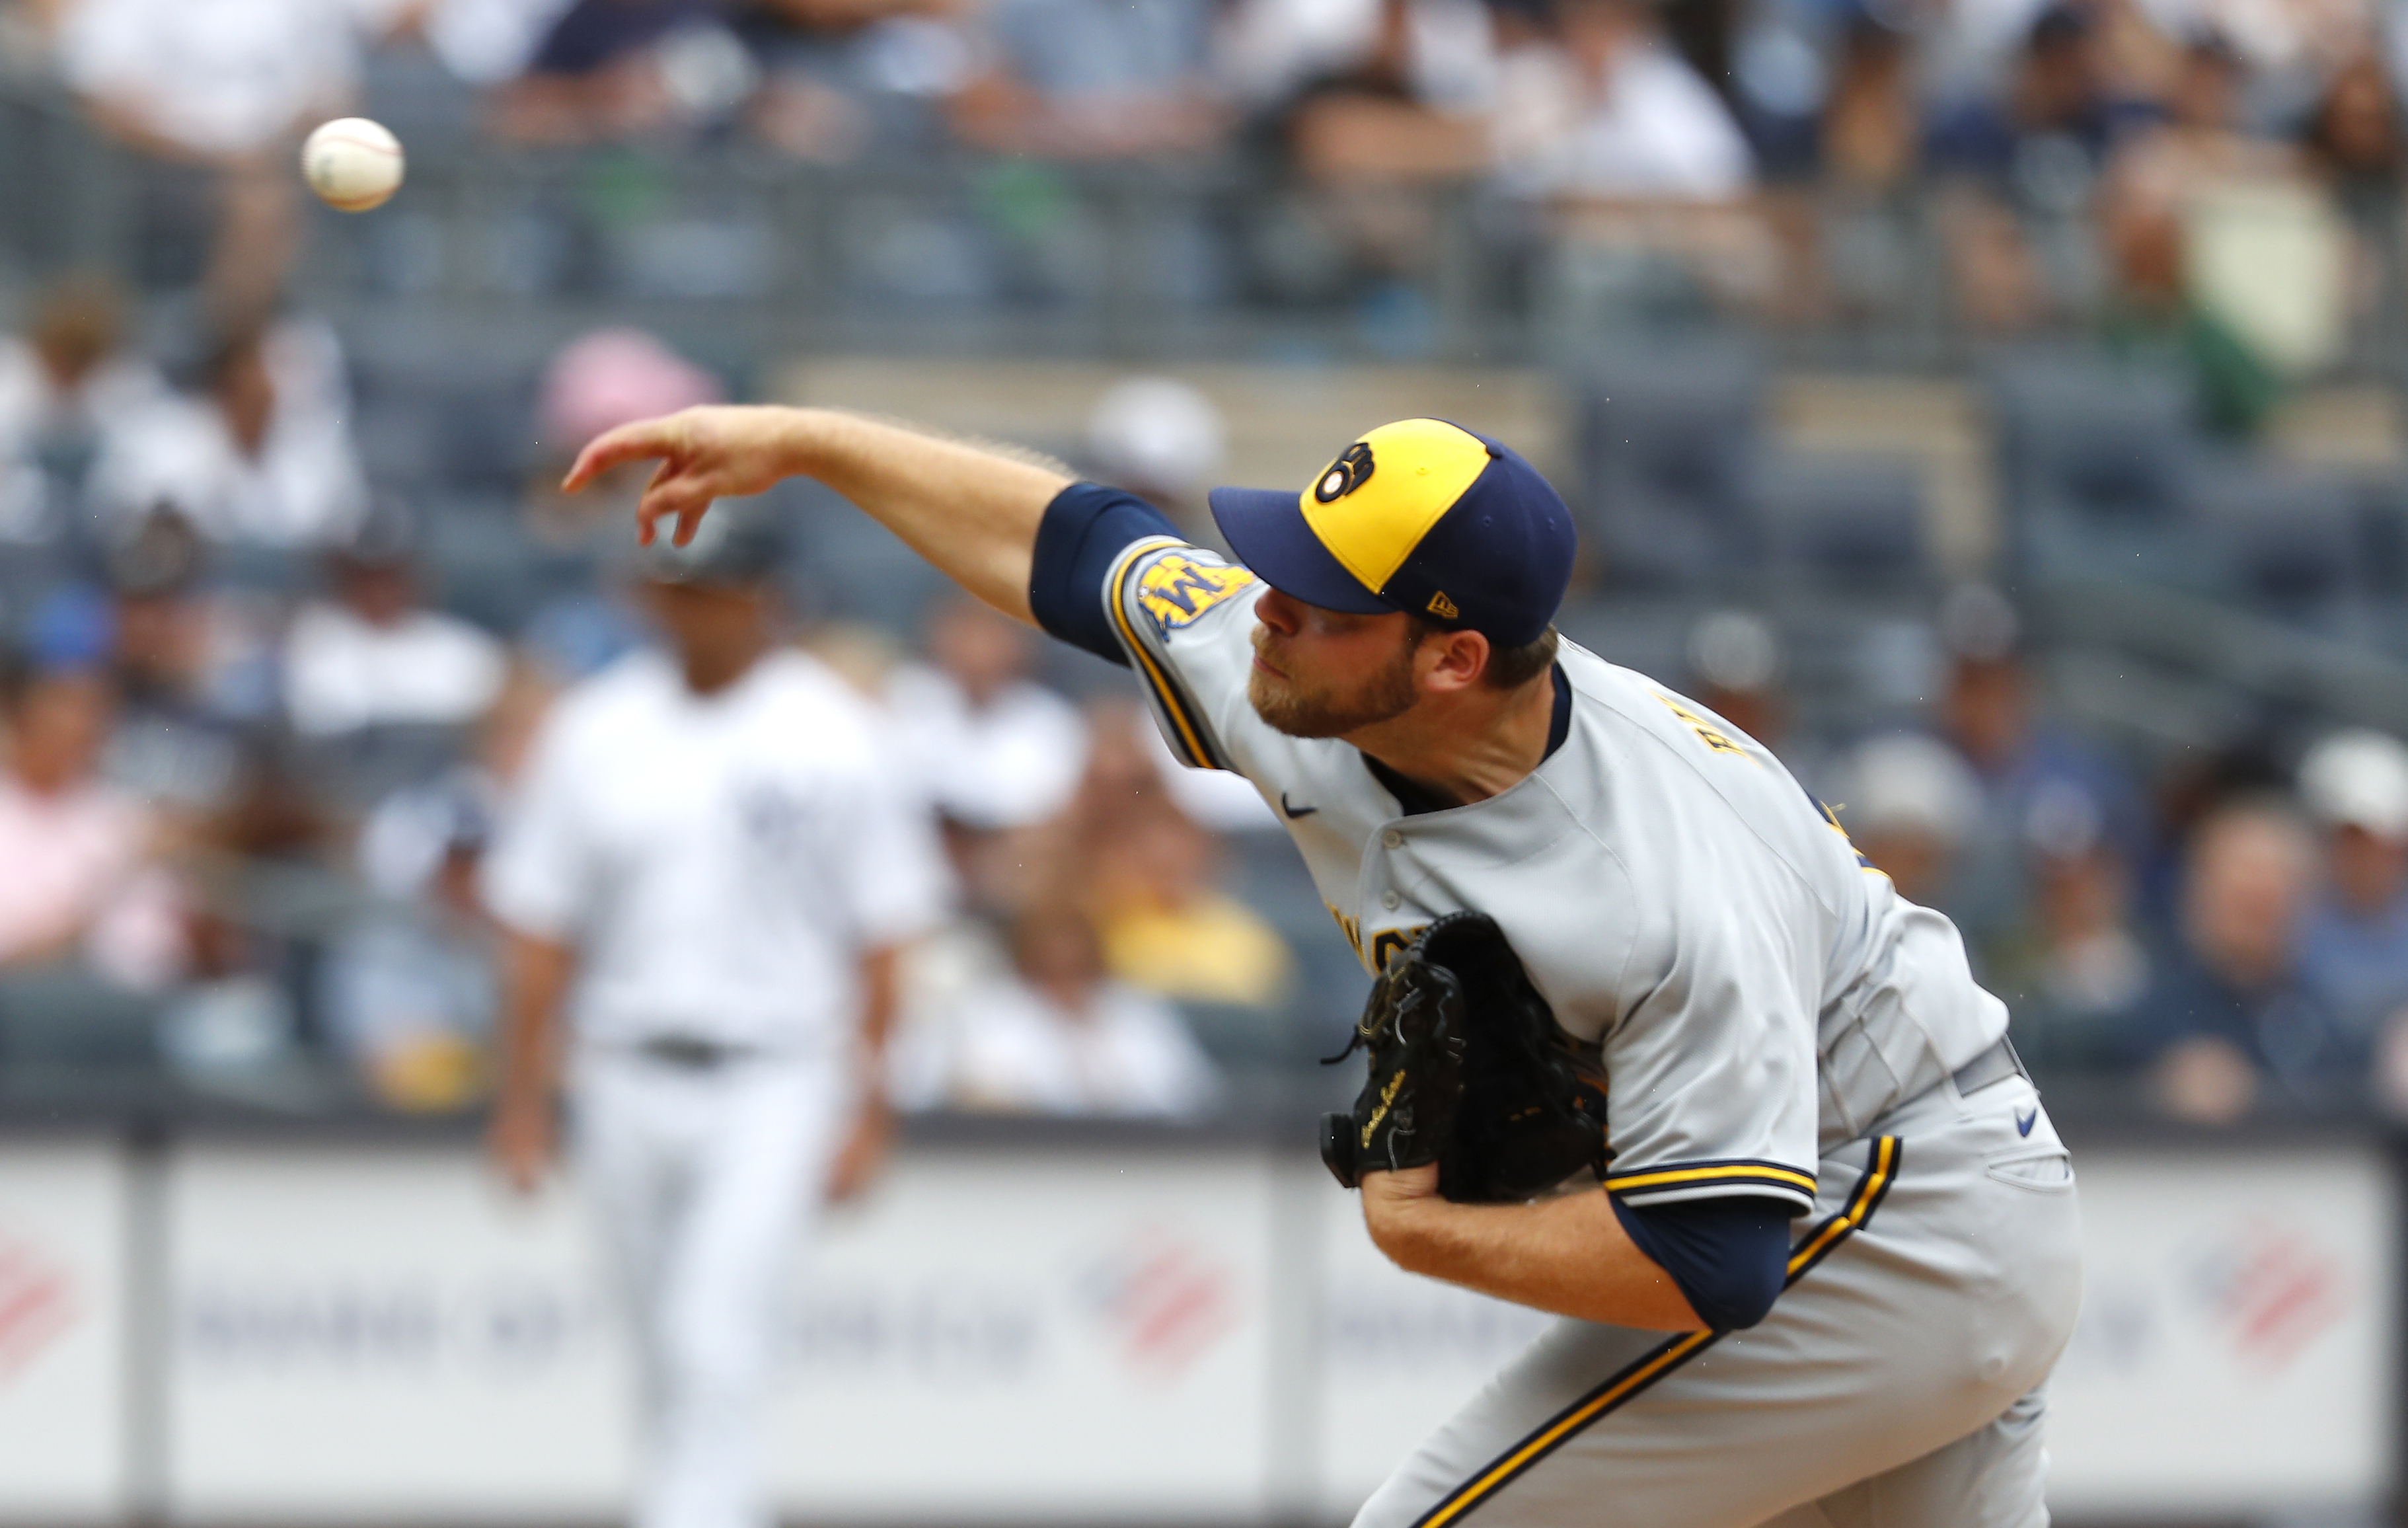 Frelick leaping catch preserves no-hit bid in 10th, Yankees and Brewers  tied 0-0